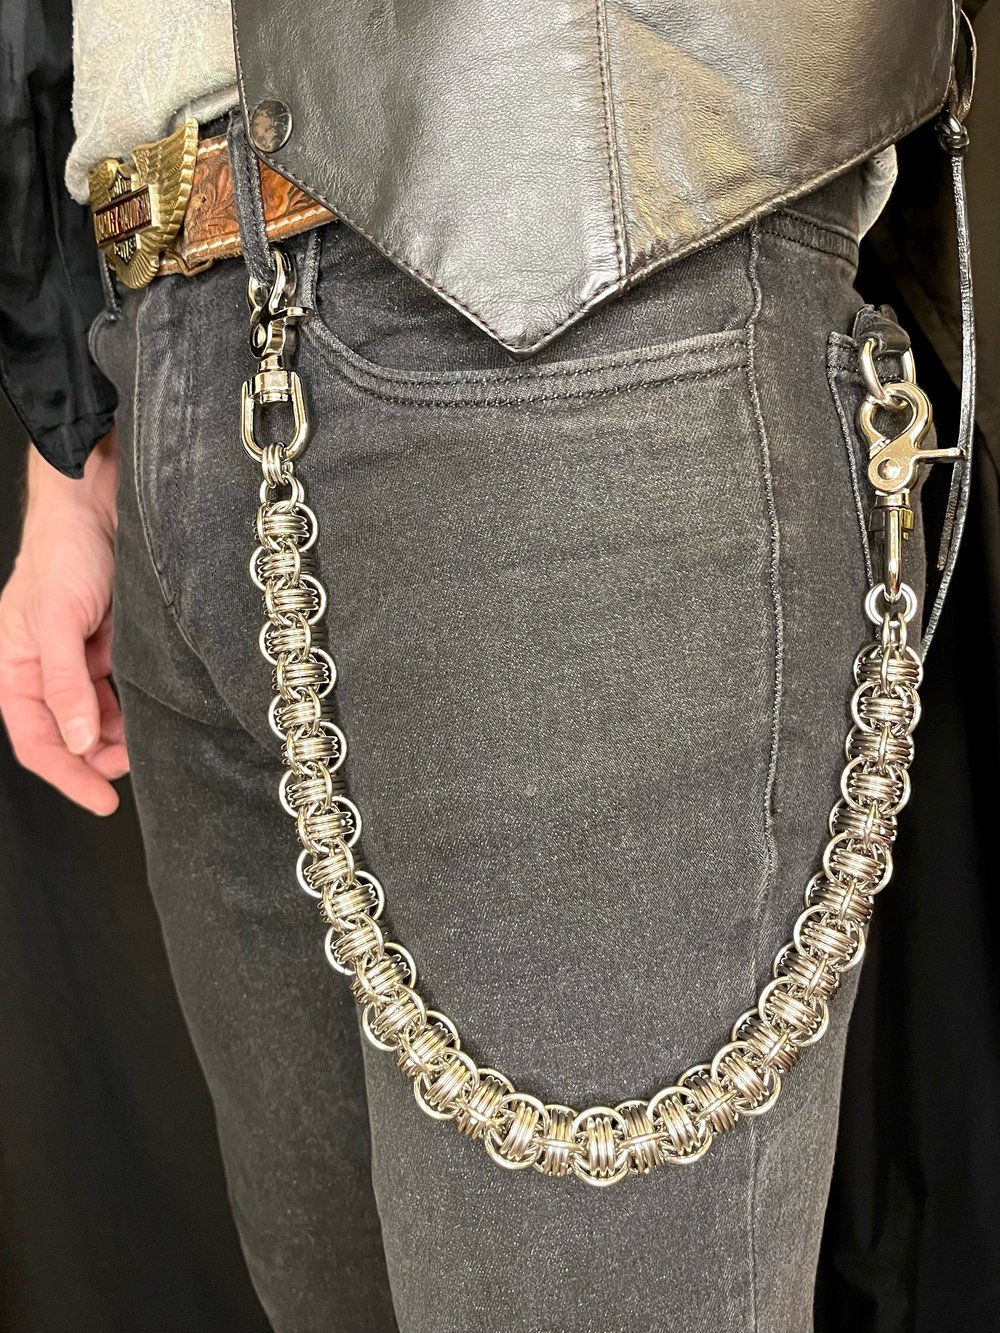 Bore Worm Wallet Chain